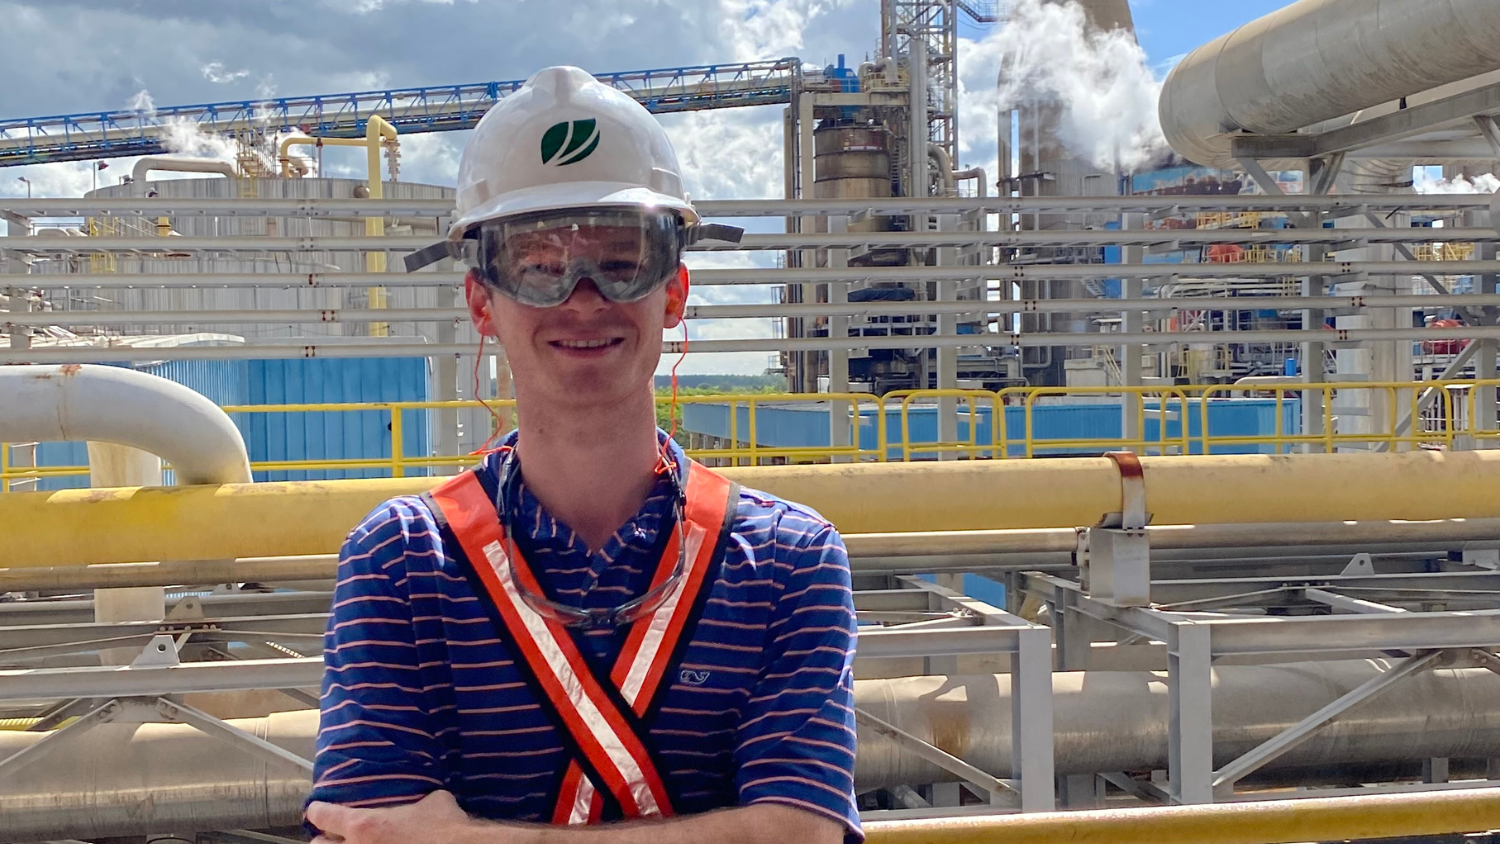 Weston Cregger, wearing a white hard hat, stands in front of an industrial plant.